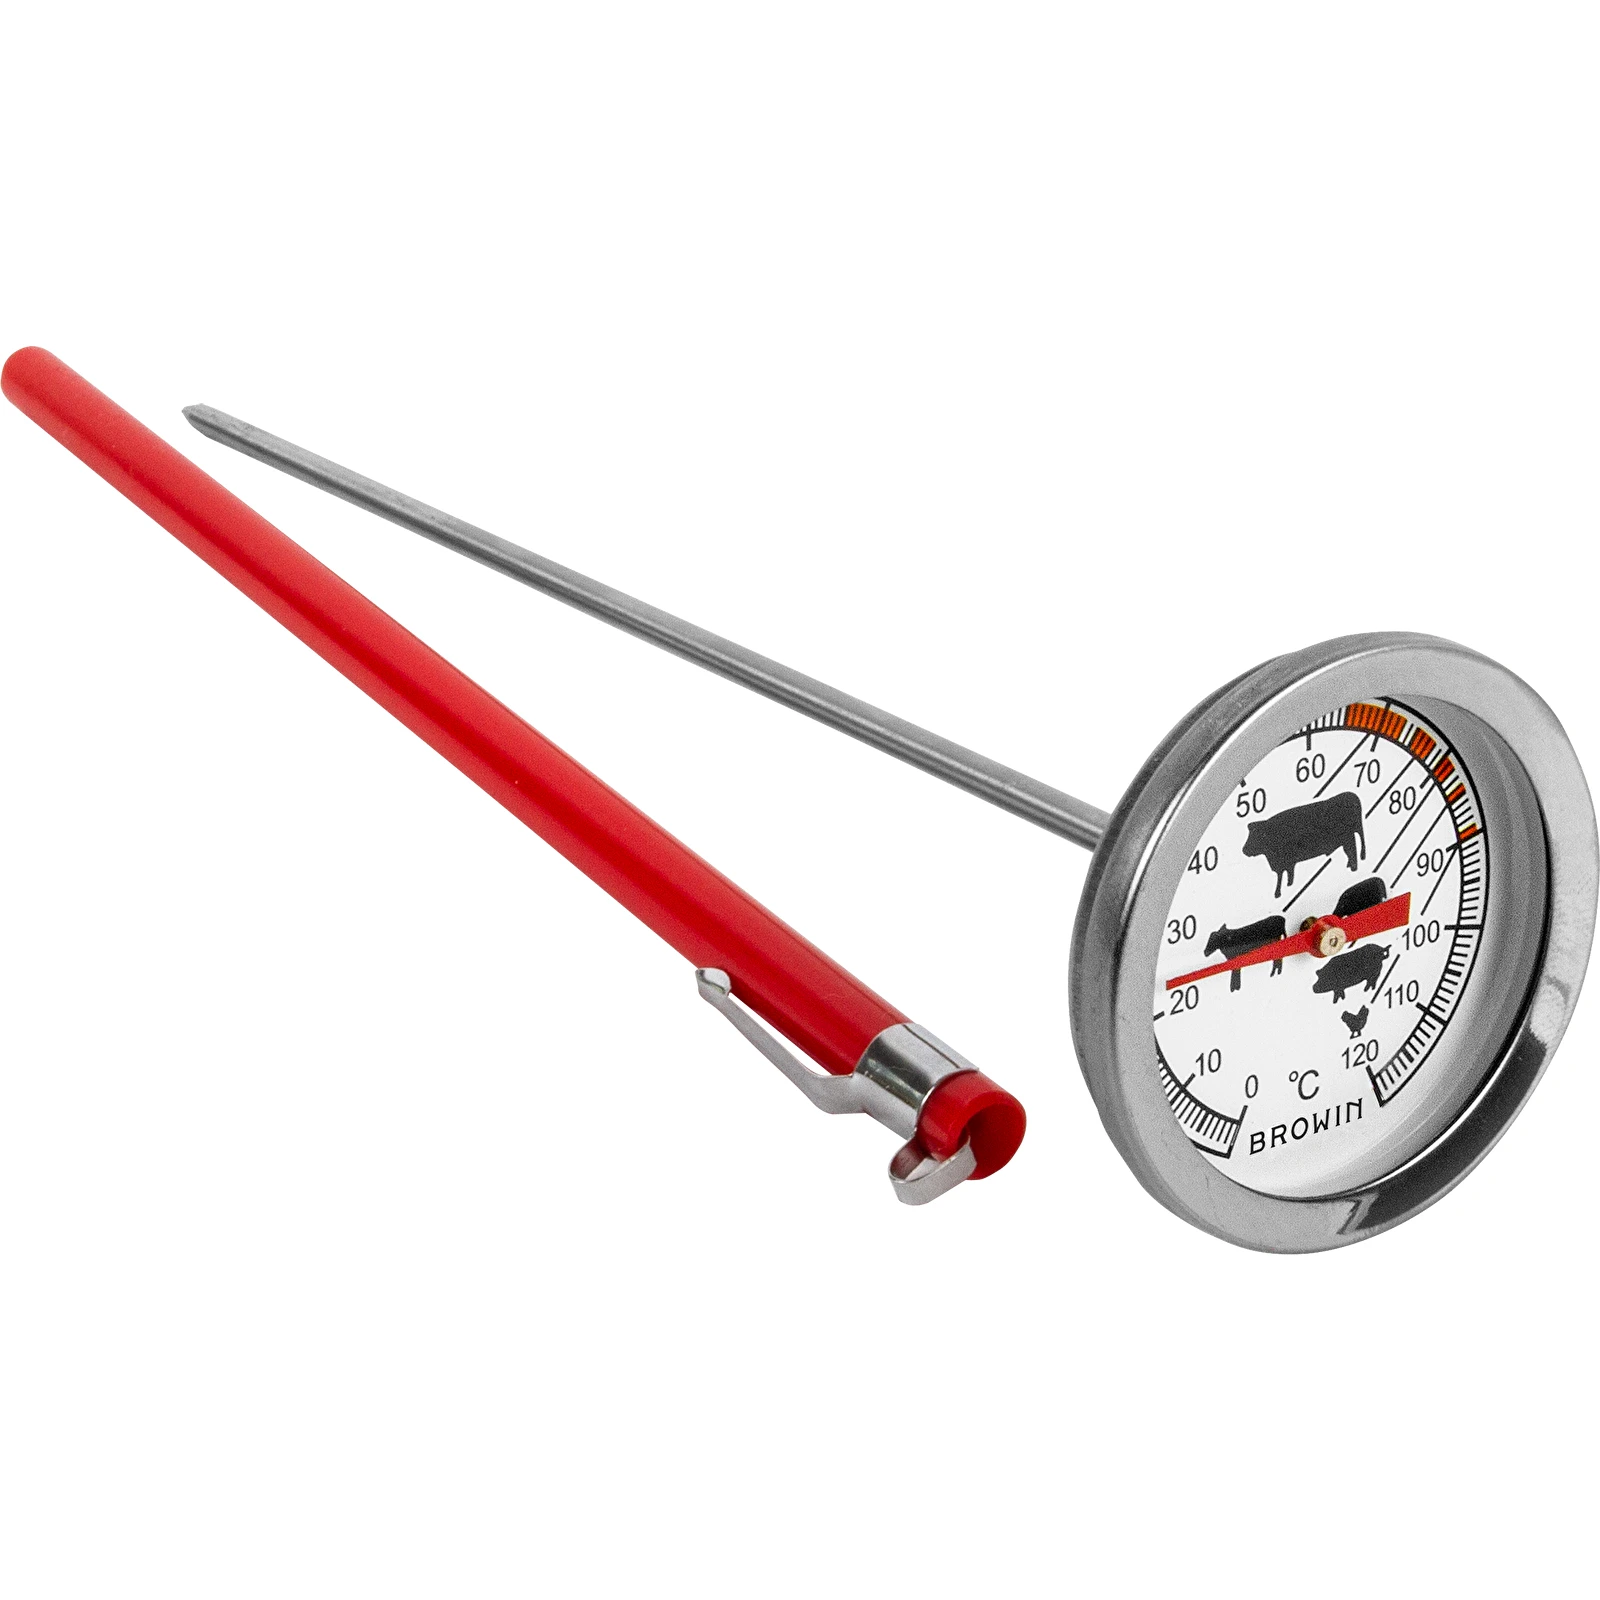 CDN Professional Baker's Insta-Read Kitchen Thermometer – The